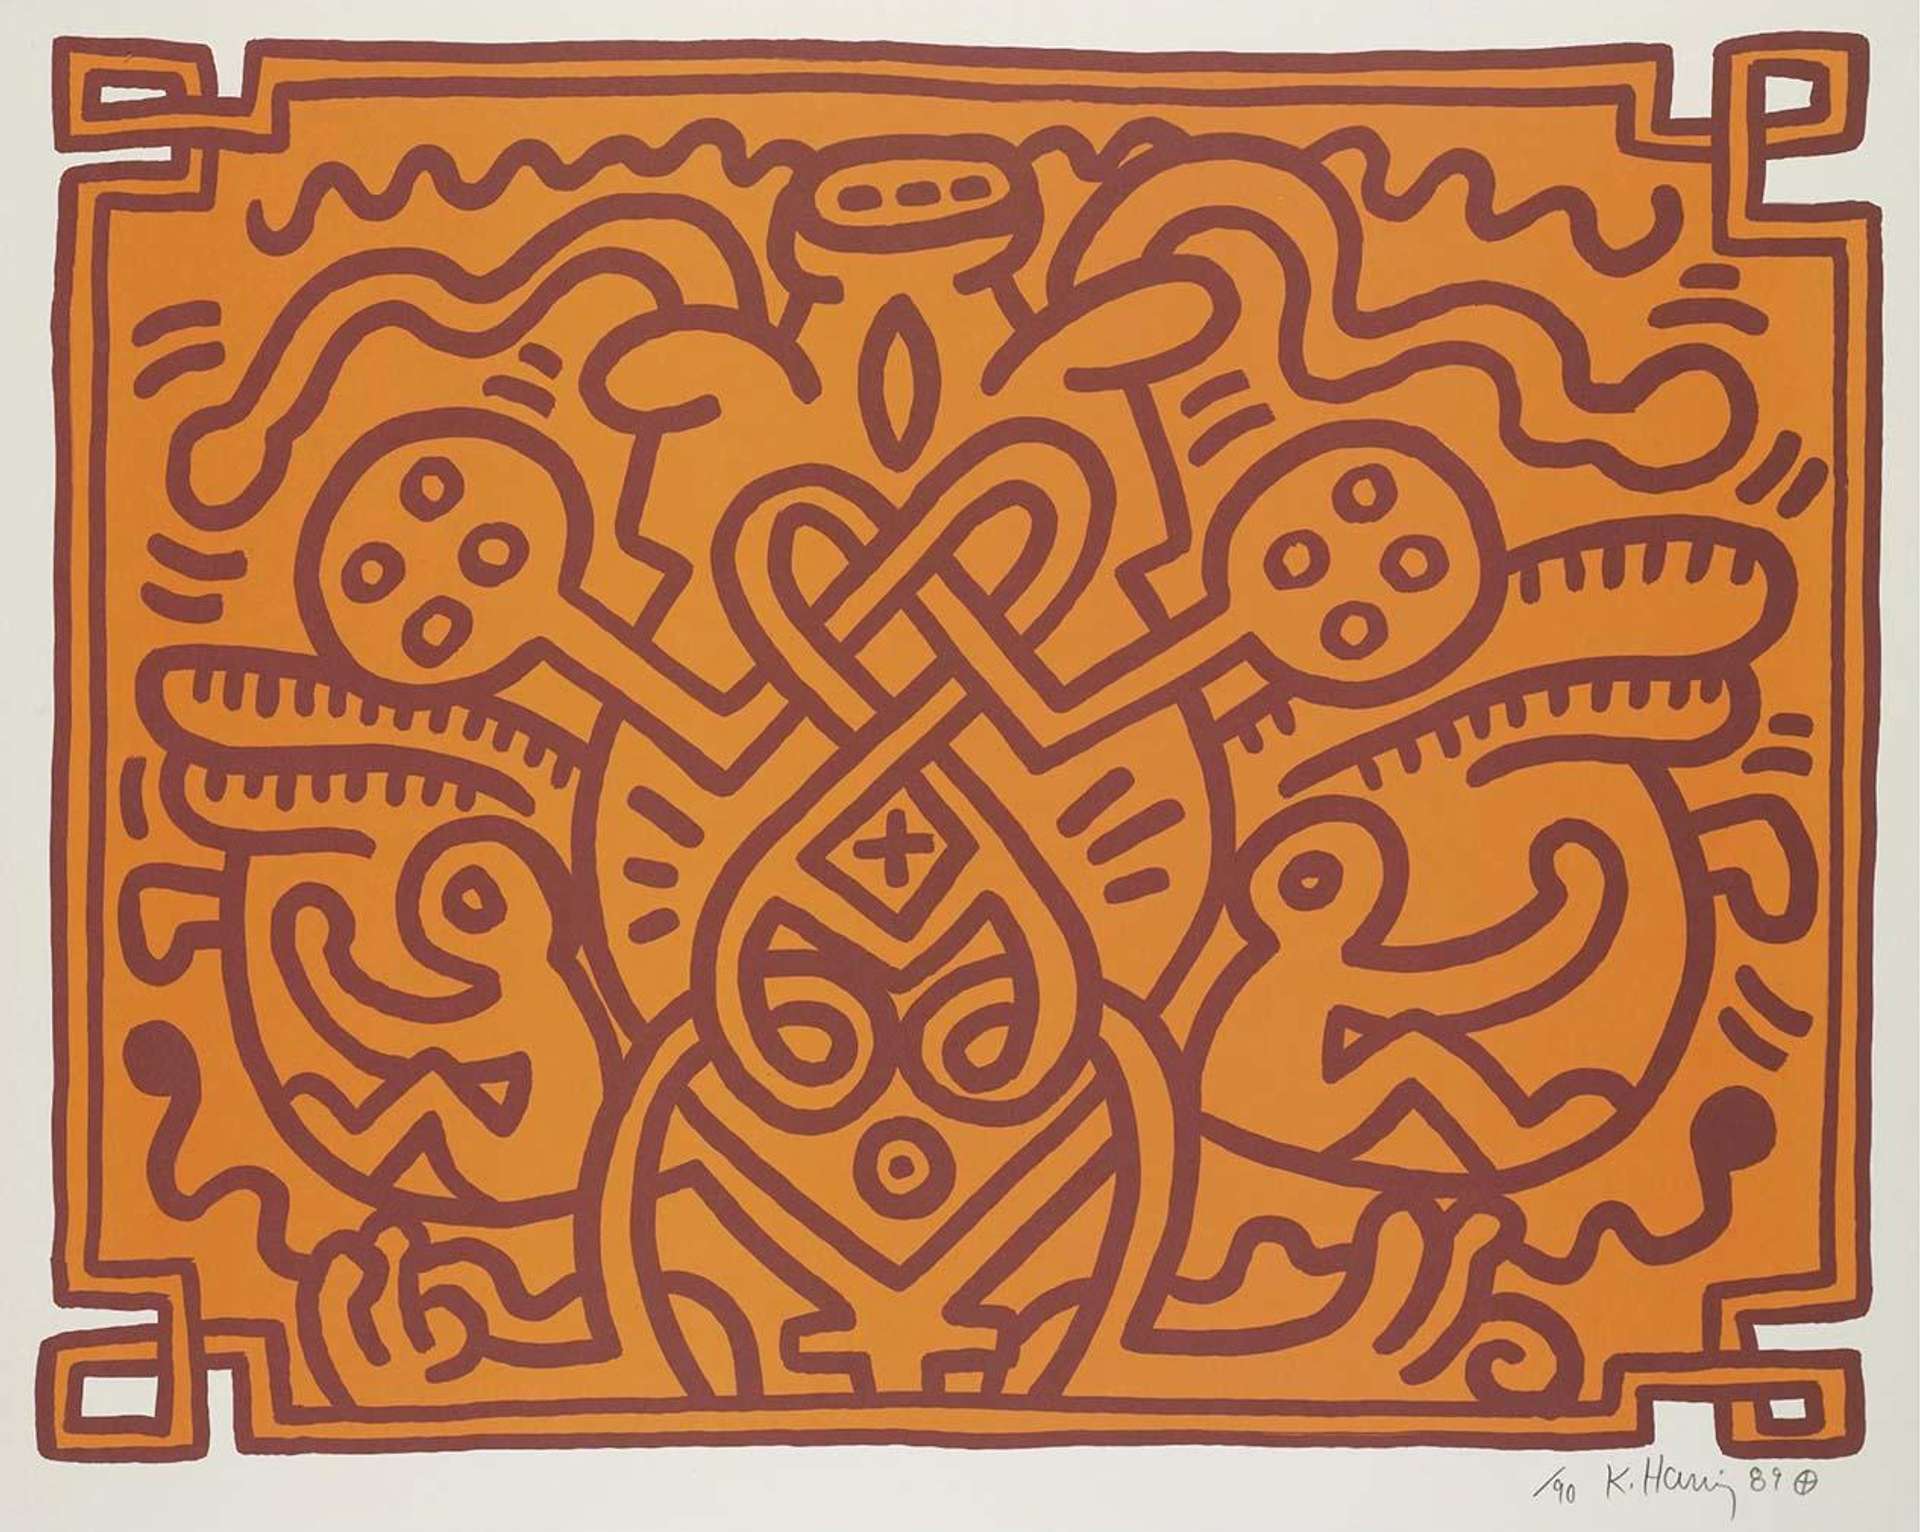 Keith Haring’s Chocolate Buddha 4. A Pop Art lithograph of aboriginal inspired, brown figures against an orange background.